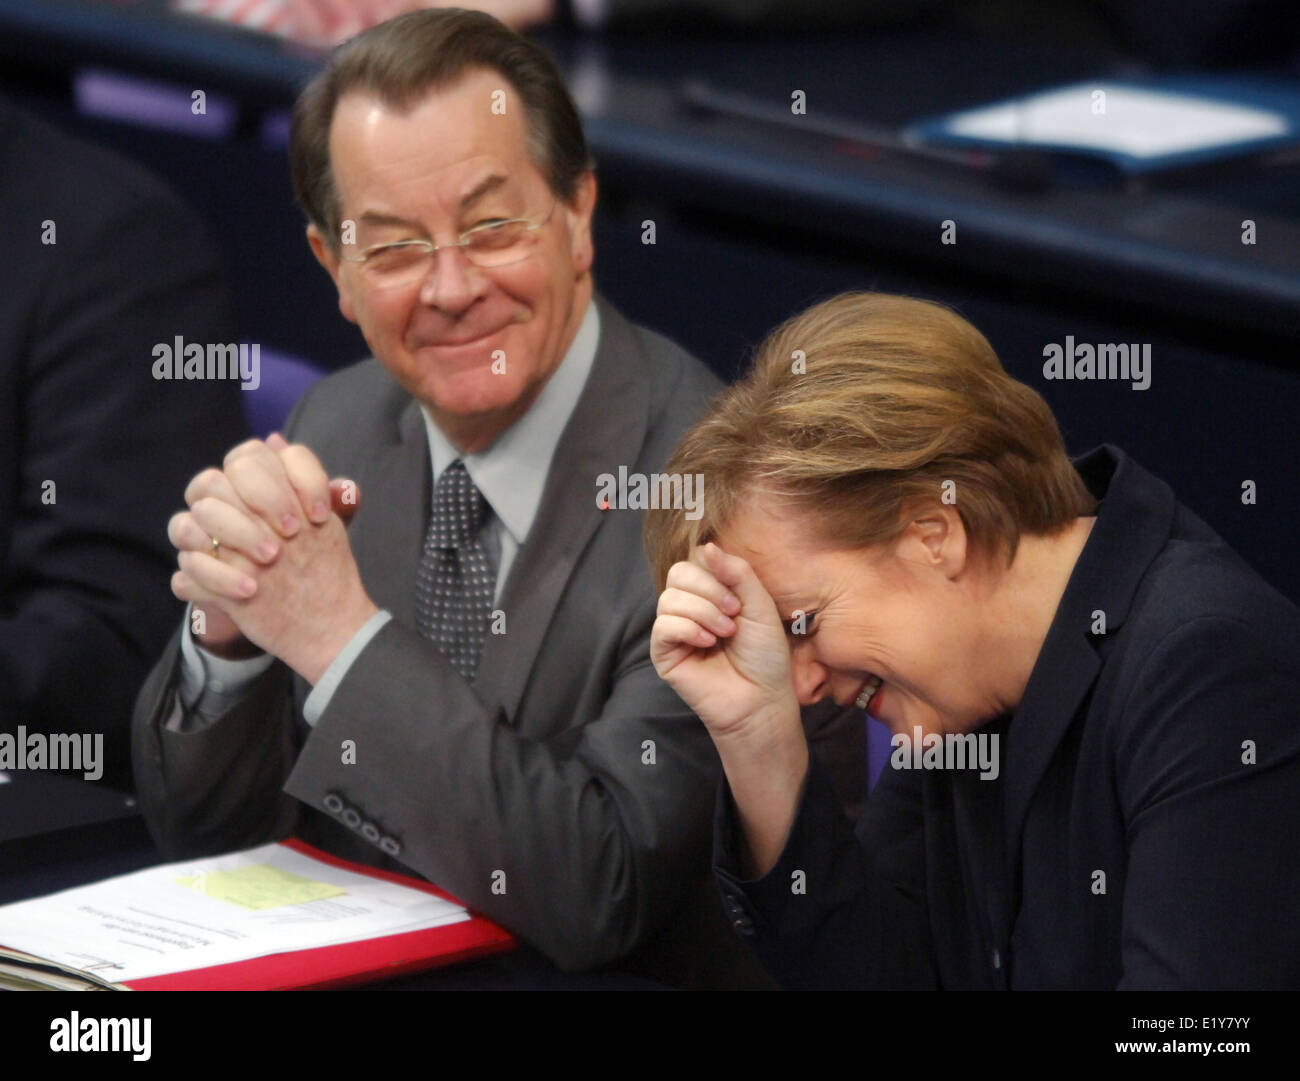 Chancellor Angela Merkel (CDU) and vice chancellor Franz Müntefering (SPD) laugh together (01.12.2005) in the Bundestag.  Foto: Peter Kneffel dpa/lbn +++(c) dpa - Report+++ Stock Photo